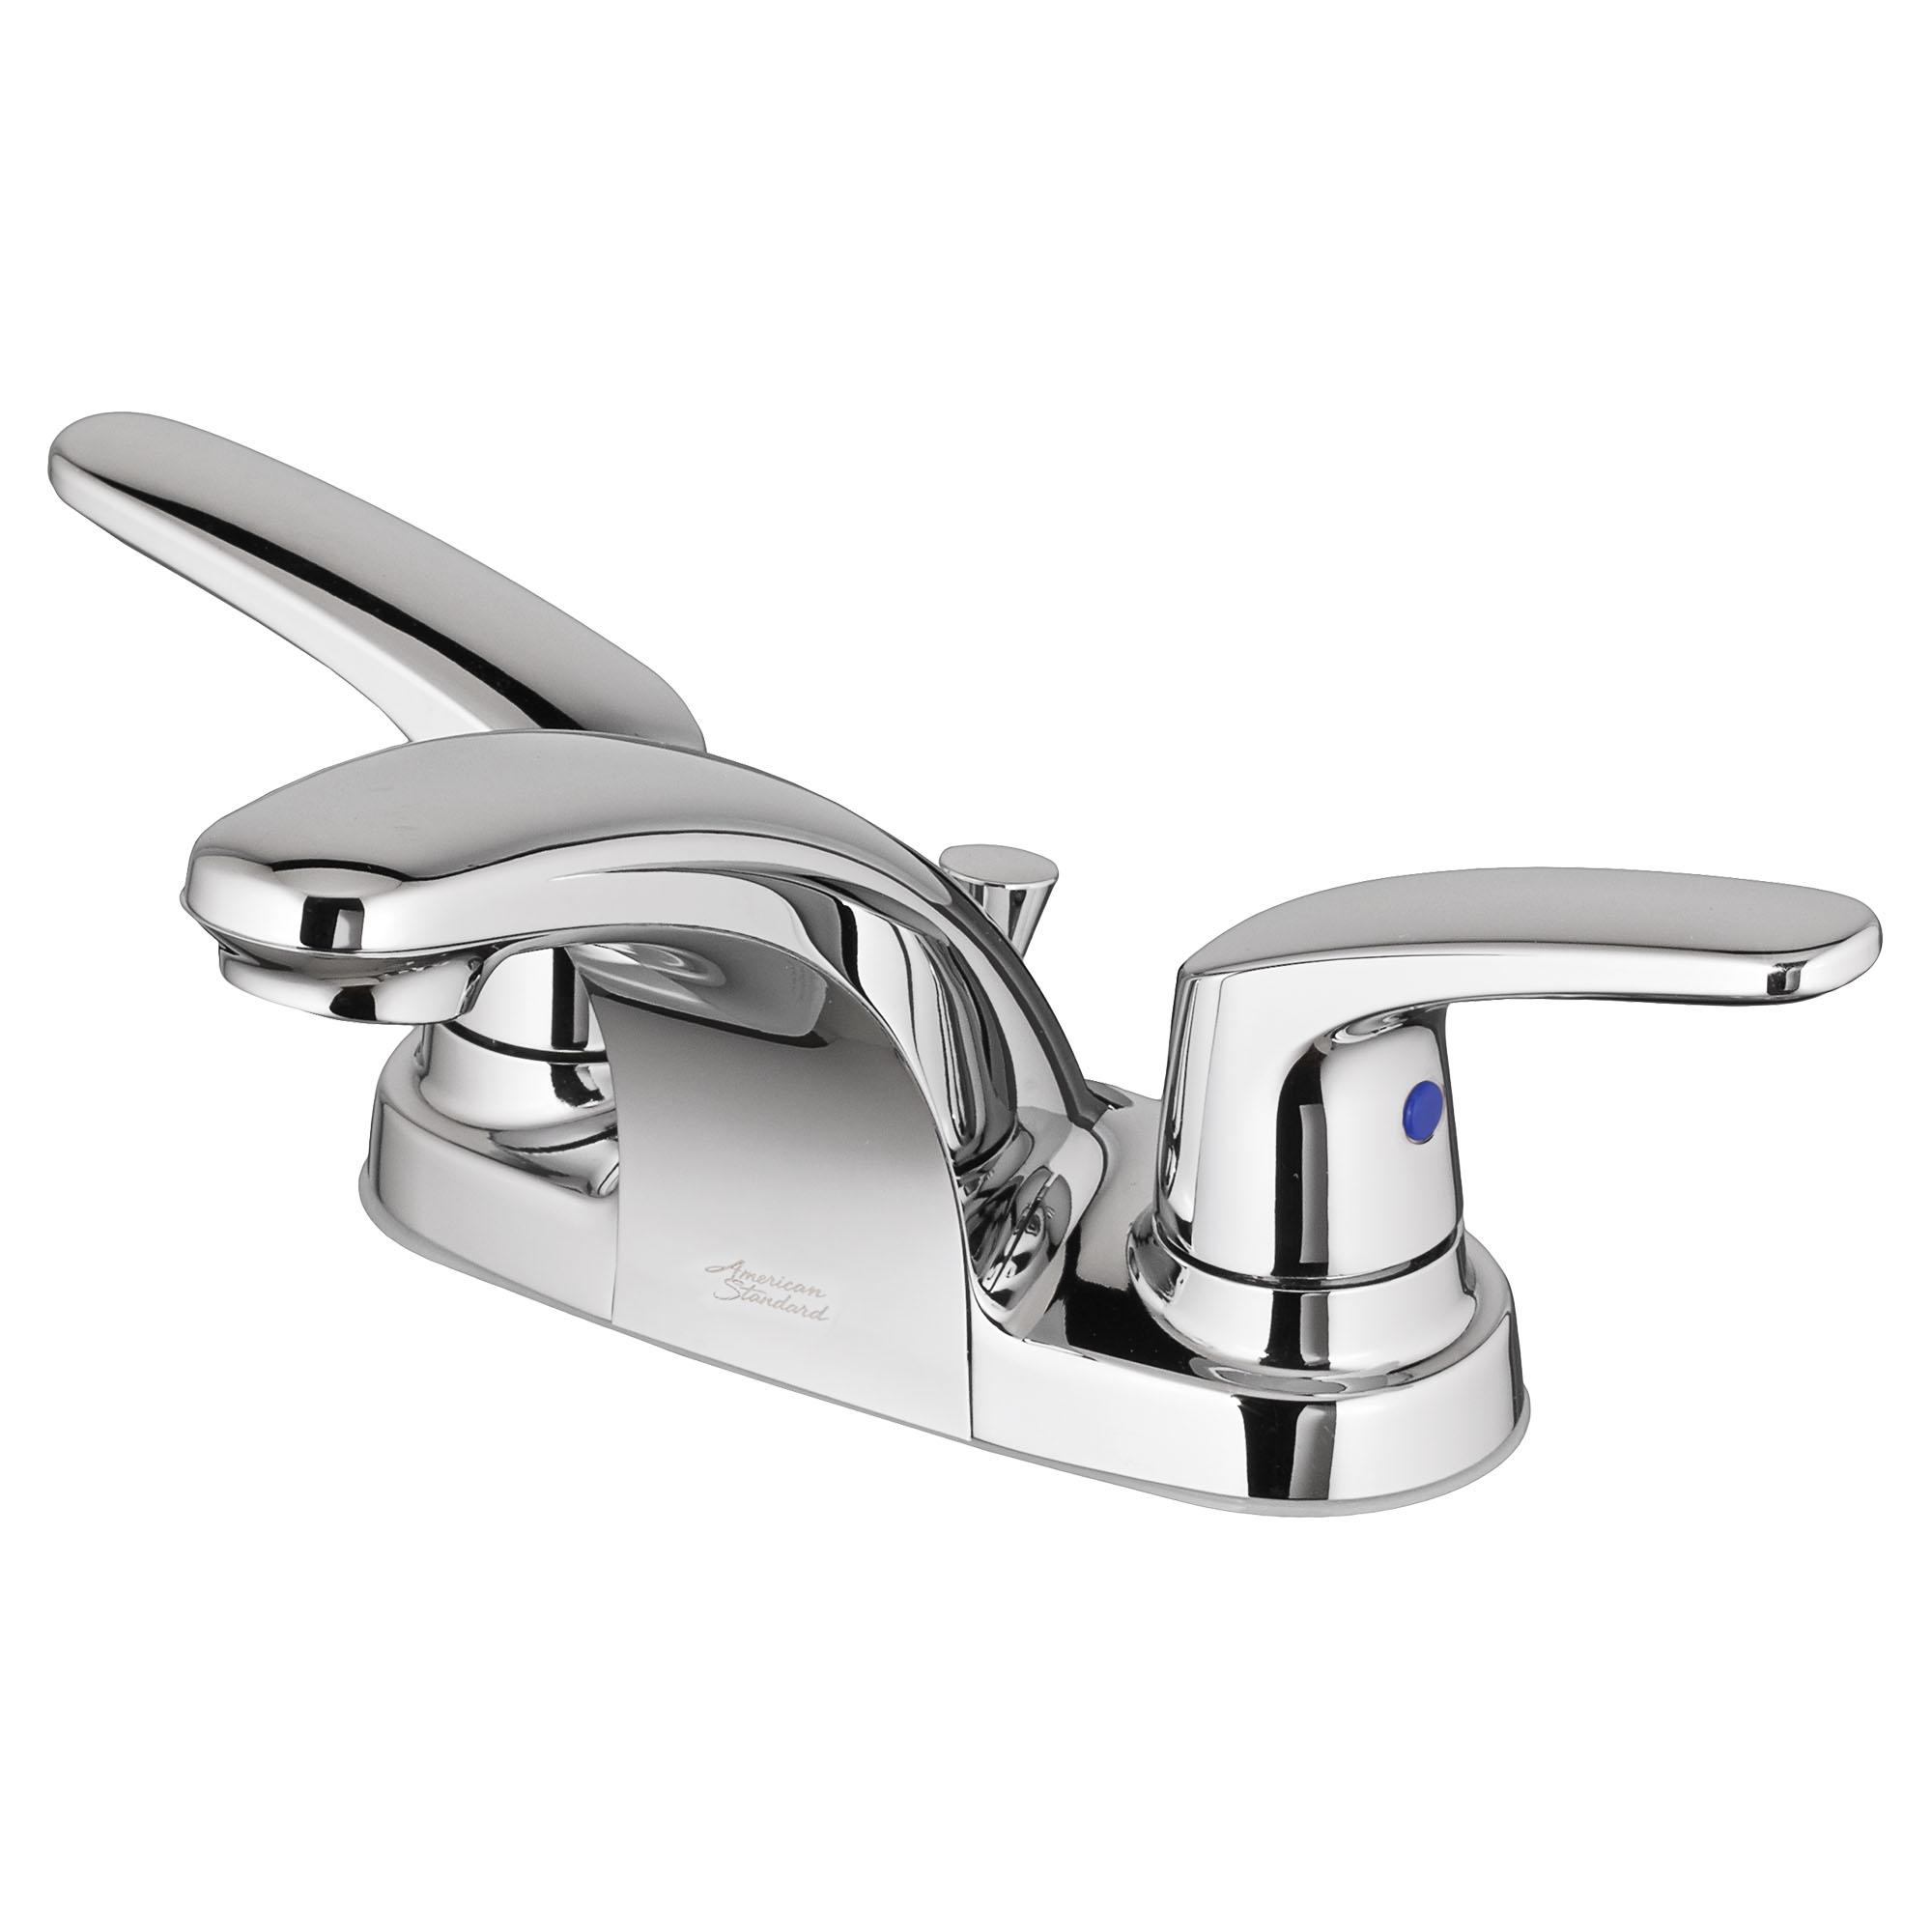 Colony® PRO 4-Inch Centerset 2-Handle Bathroom Faucet 1.0 gpm/3.8 Lpm With Lever Handles